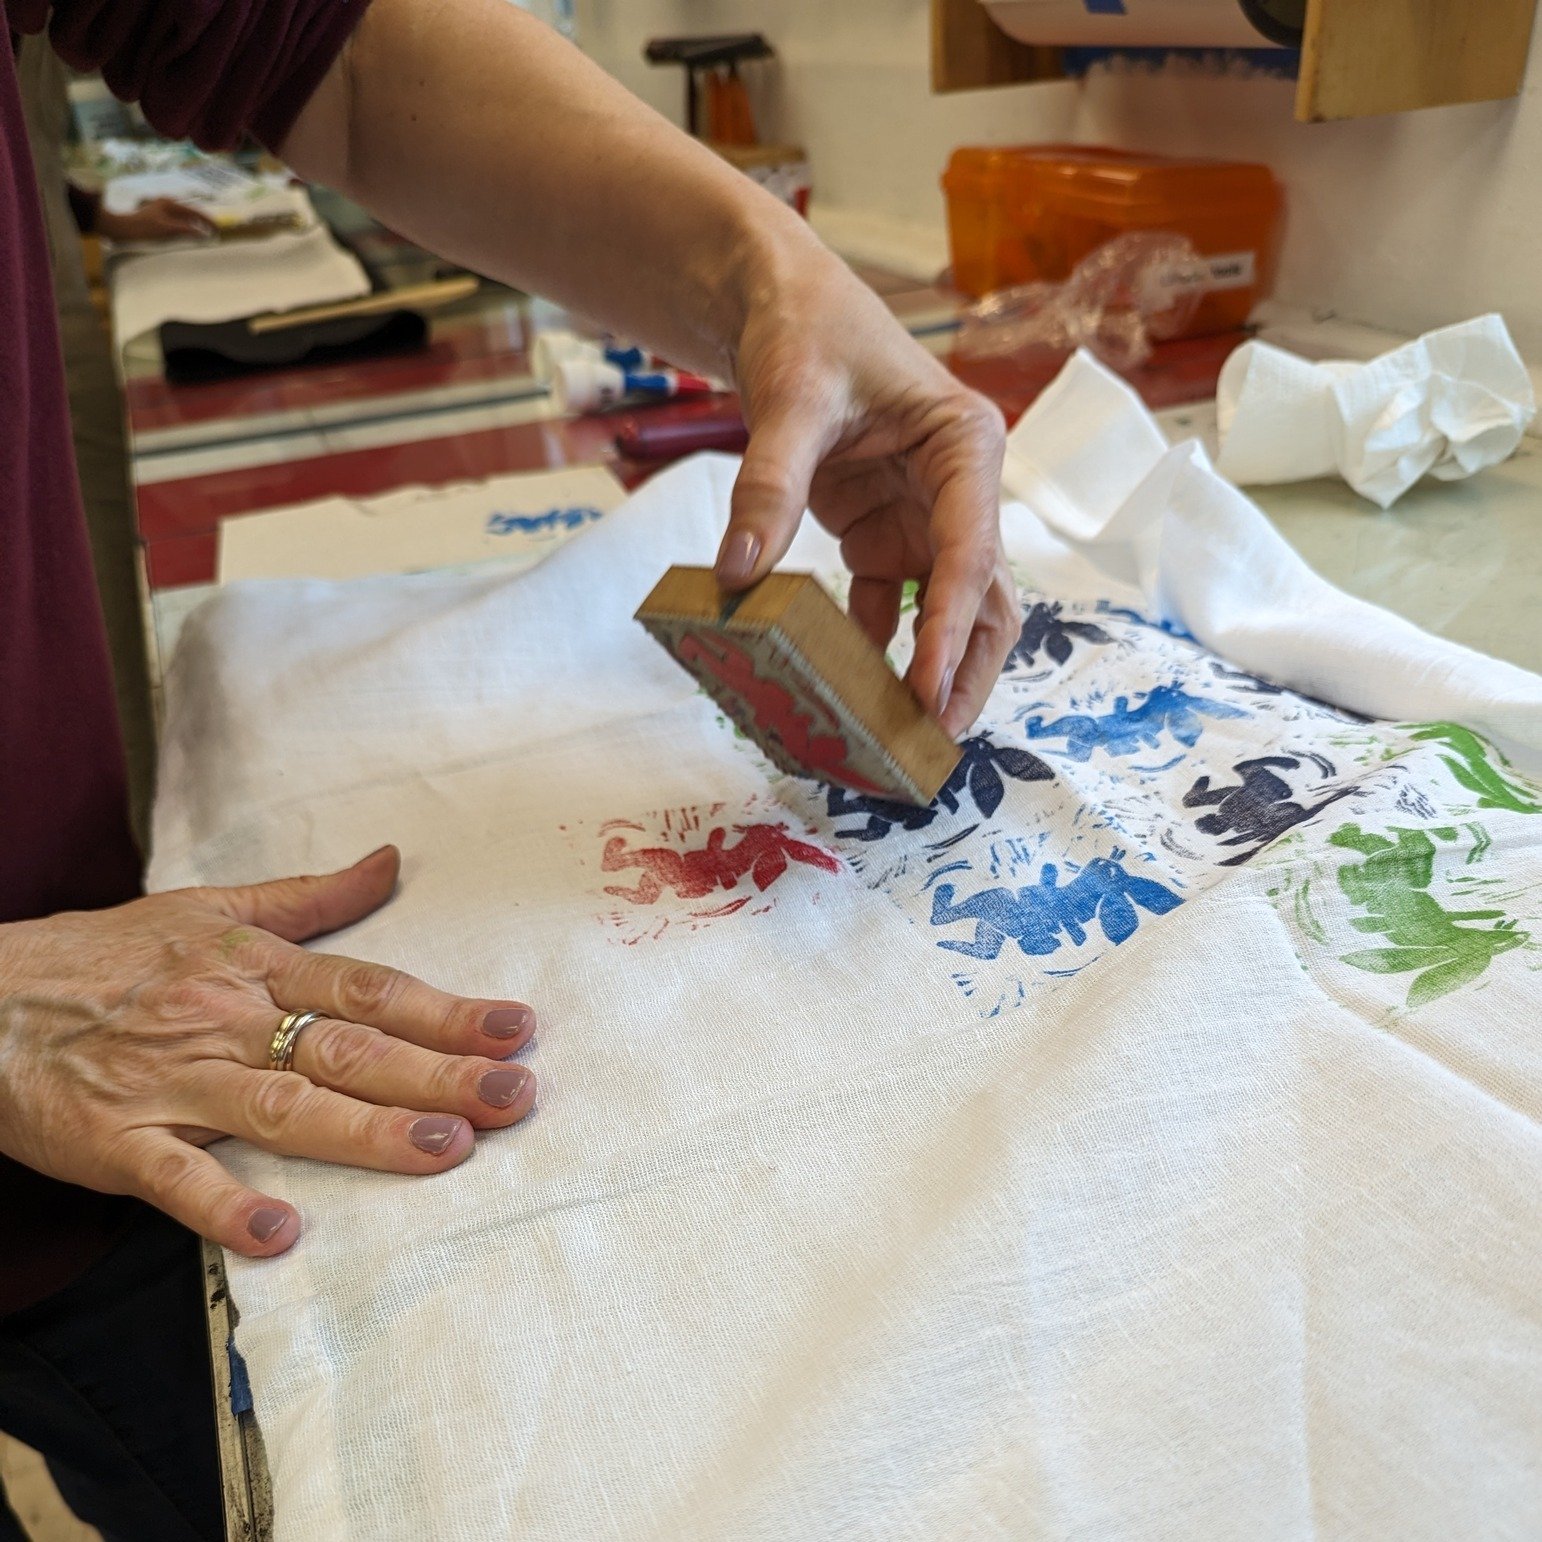 Check out the beautiful work from this weekend&rsquo;s class, Block Printing on Tea Towels: Adding Personal Touches to Your Kitchen with Kath Yarkosky!

Students prepped and carved their lino blocks and printed them onto cotton tea towels with fabric